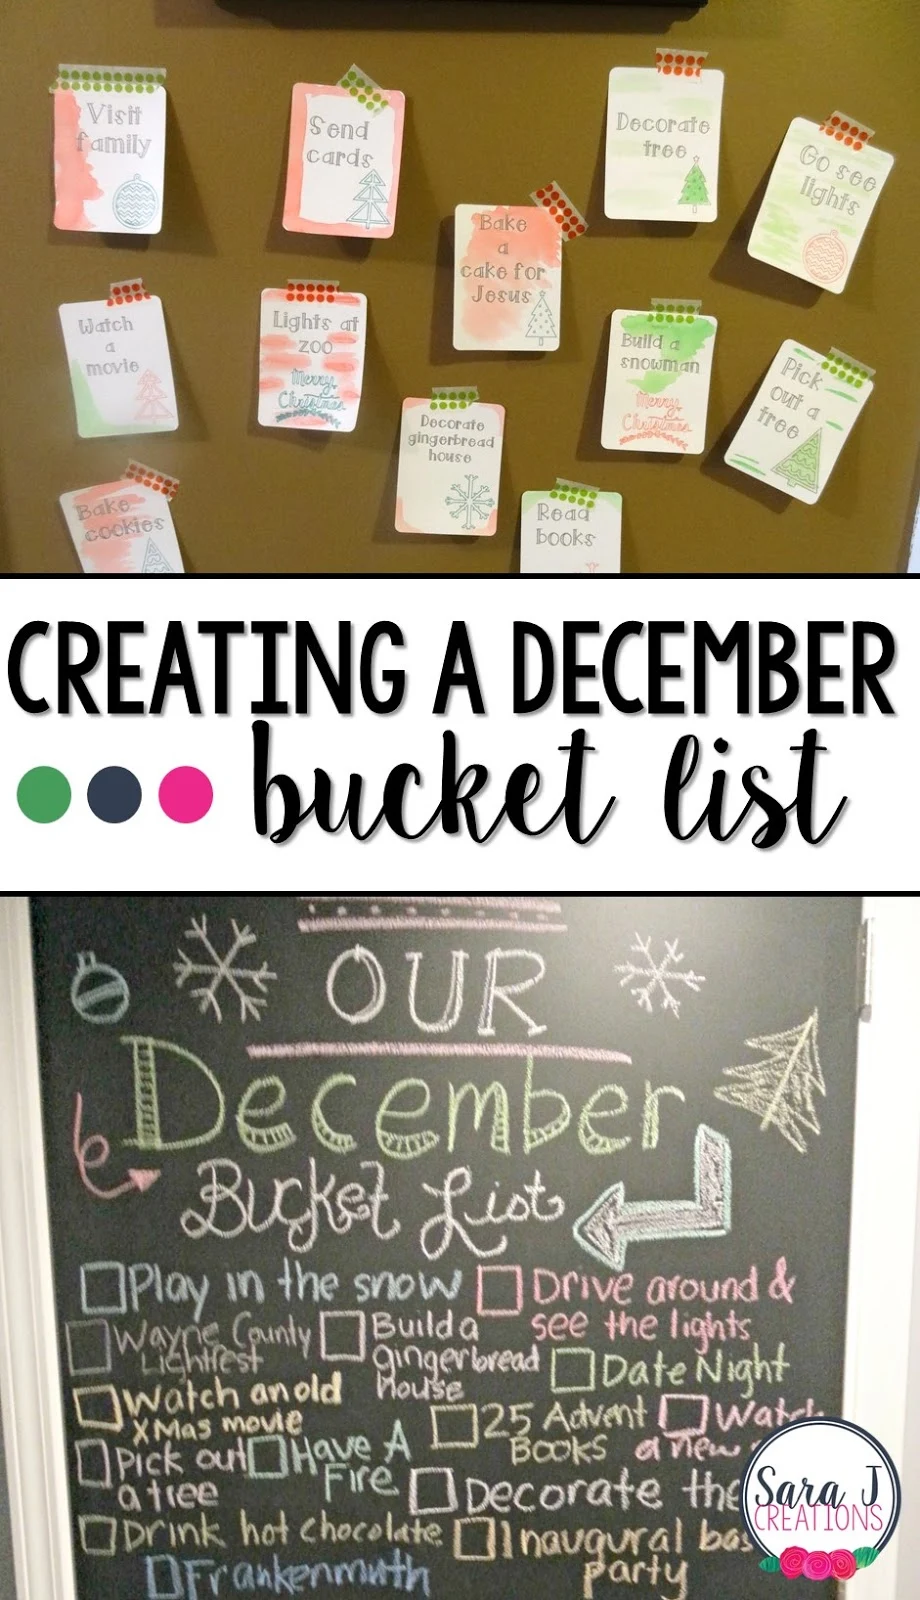 Counting down to Christmas by creating a December bucket list with crafts, ideas, DIY, and traditions to make the month fun as a family.